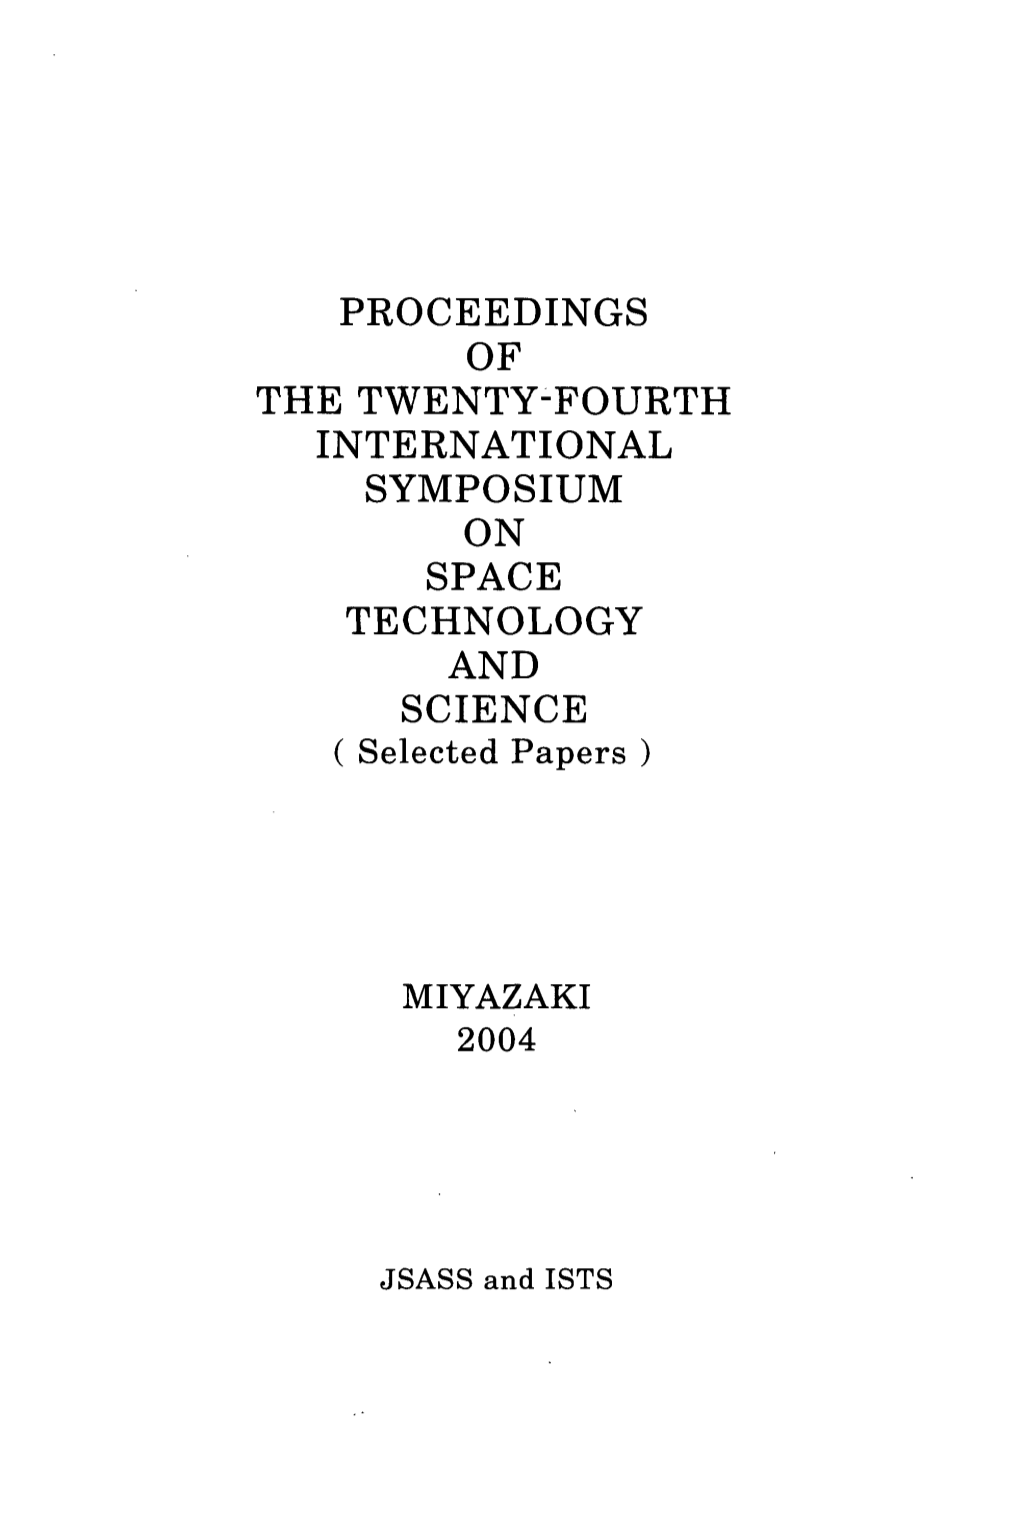 PROCEEDINGS of the TWENTY-FOURTH INTERNATIONAL SYMPOSIUM on SPACE TECHNOLOGY and SCIENCE ( Selected Papers )